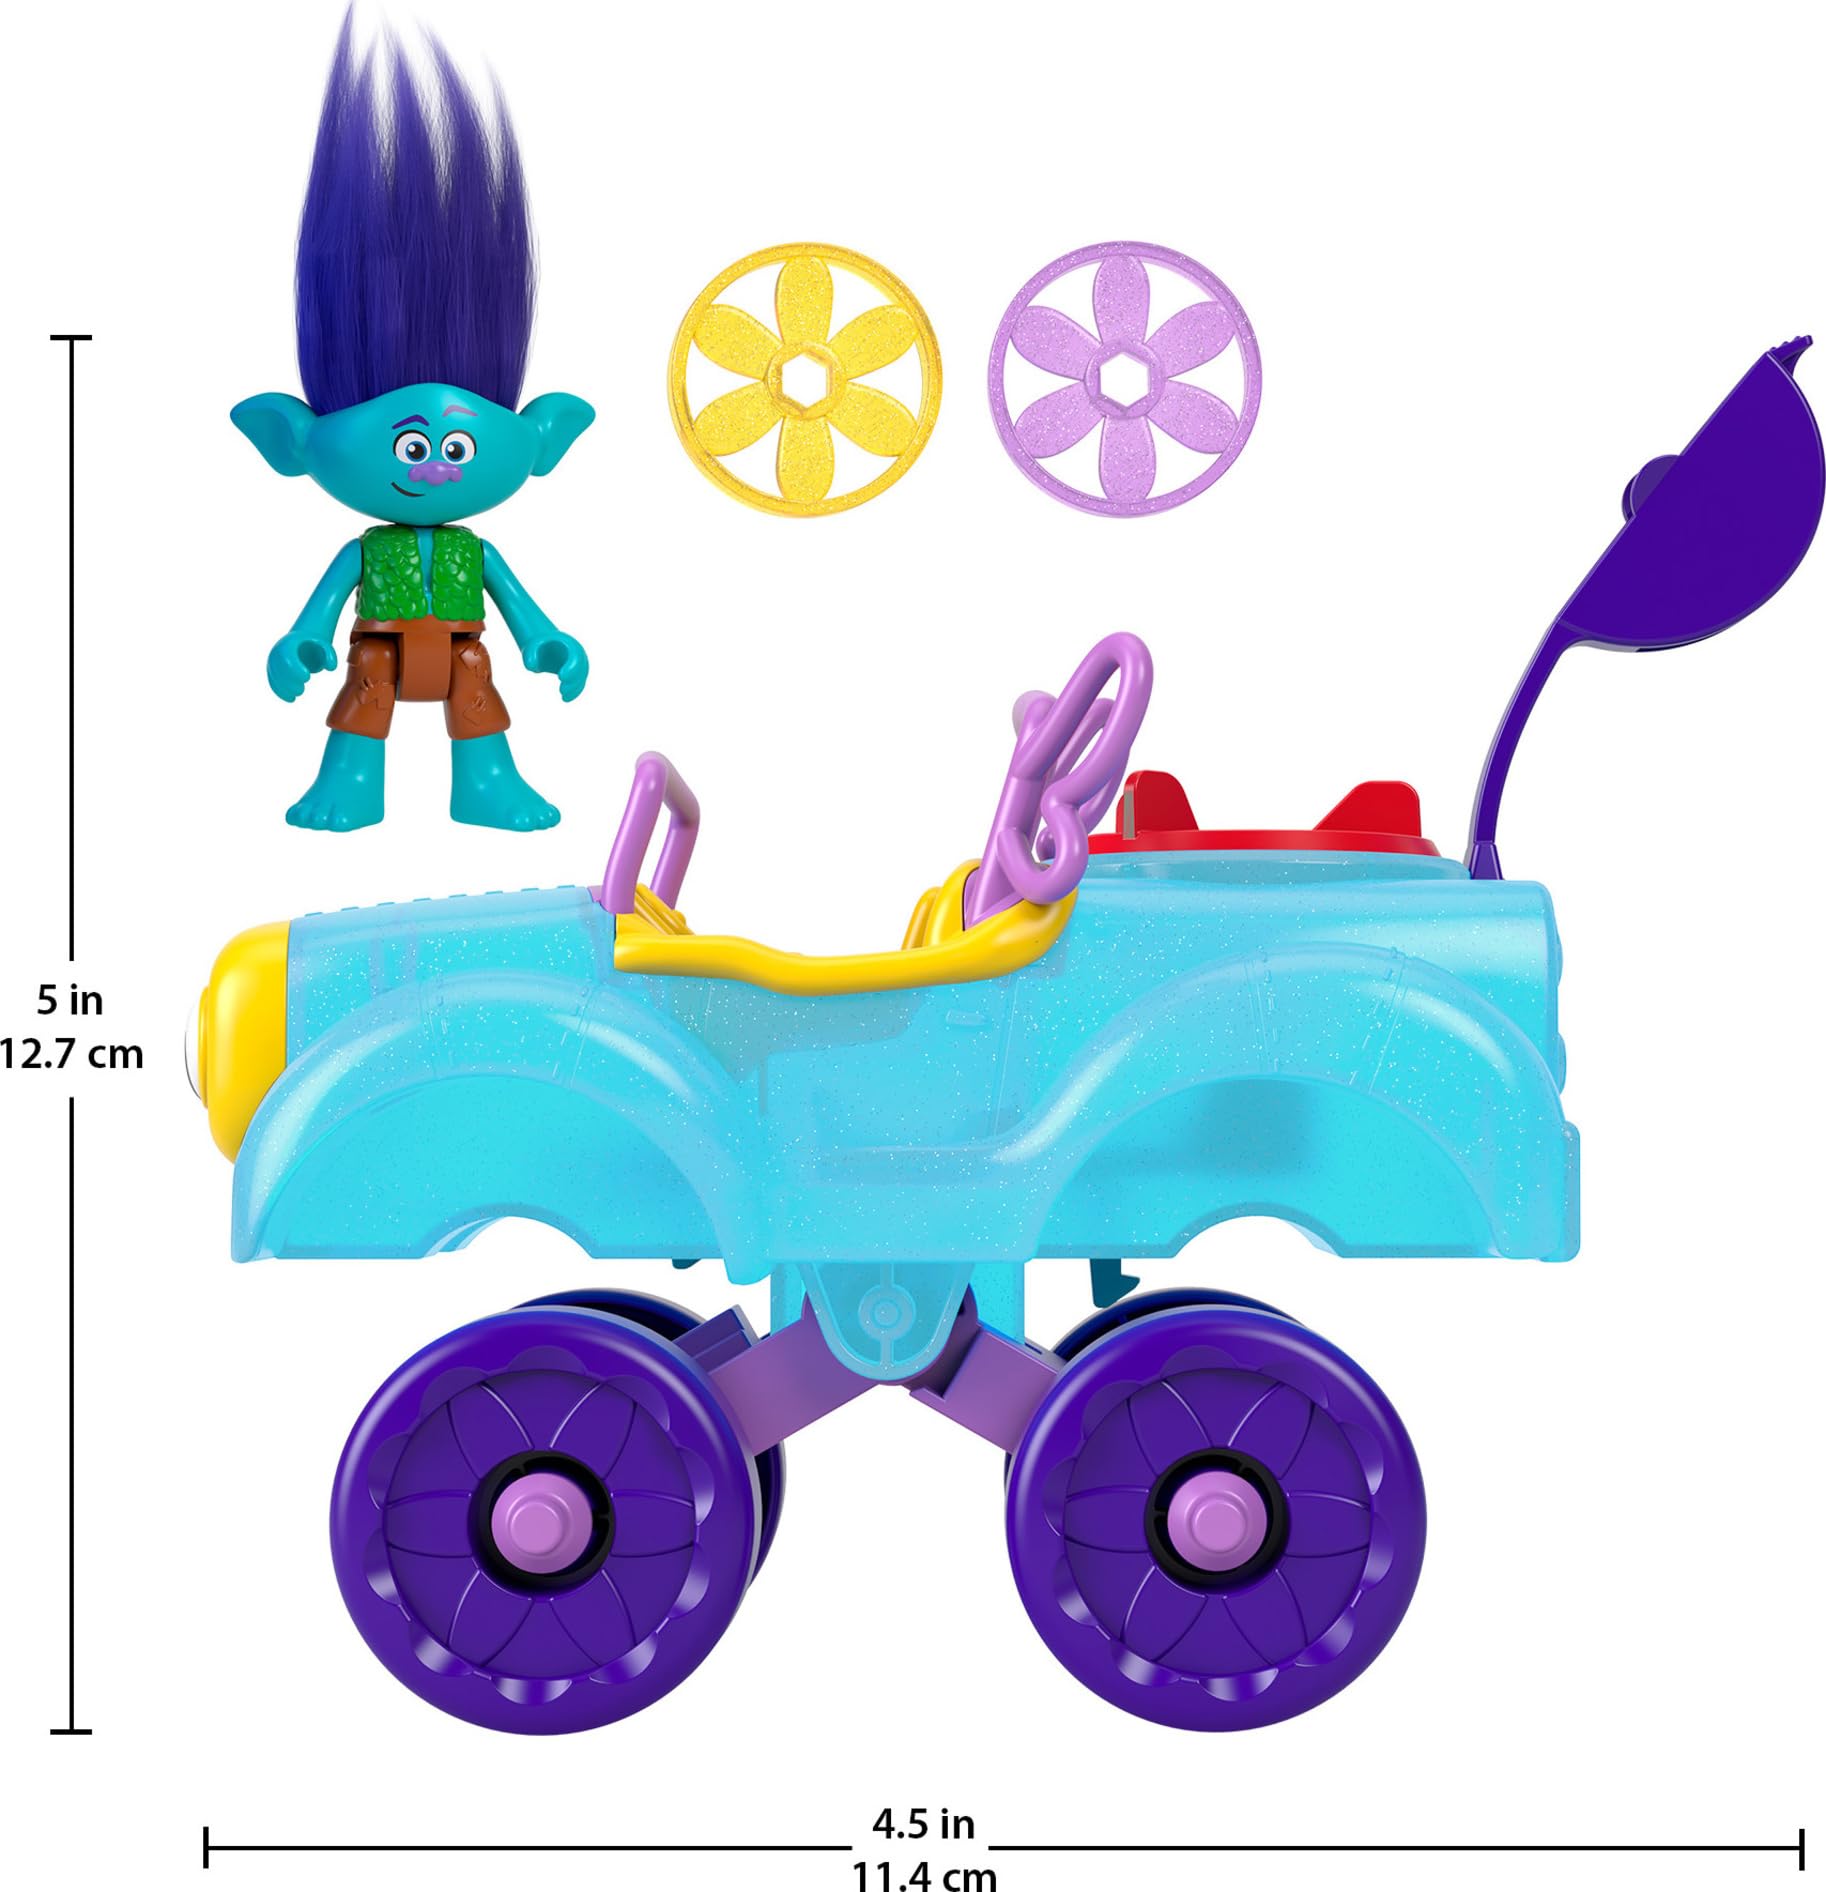 Fisher-Price Imaginext DreamWorks Trolls Toy Car and Branch Figure Playset, Branch’s Buggy with Projectile Launcher and Discs, Age 3-8 Years